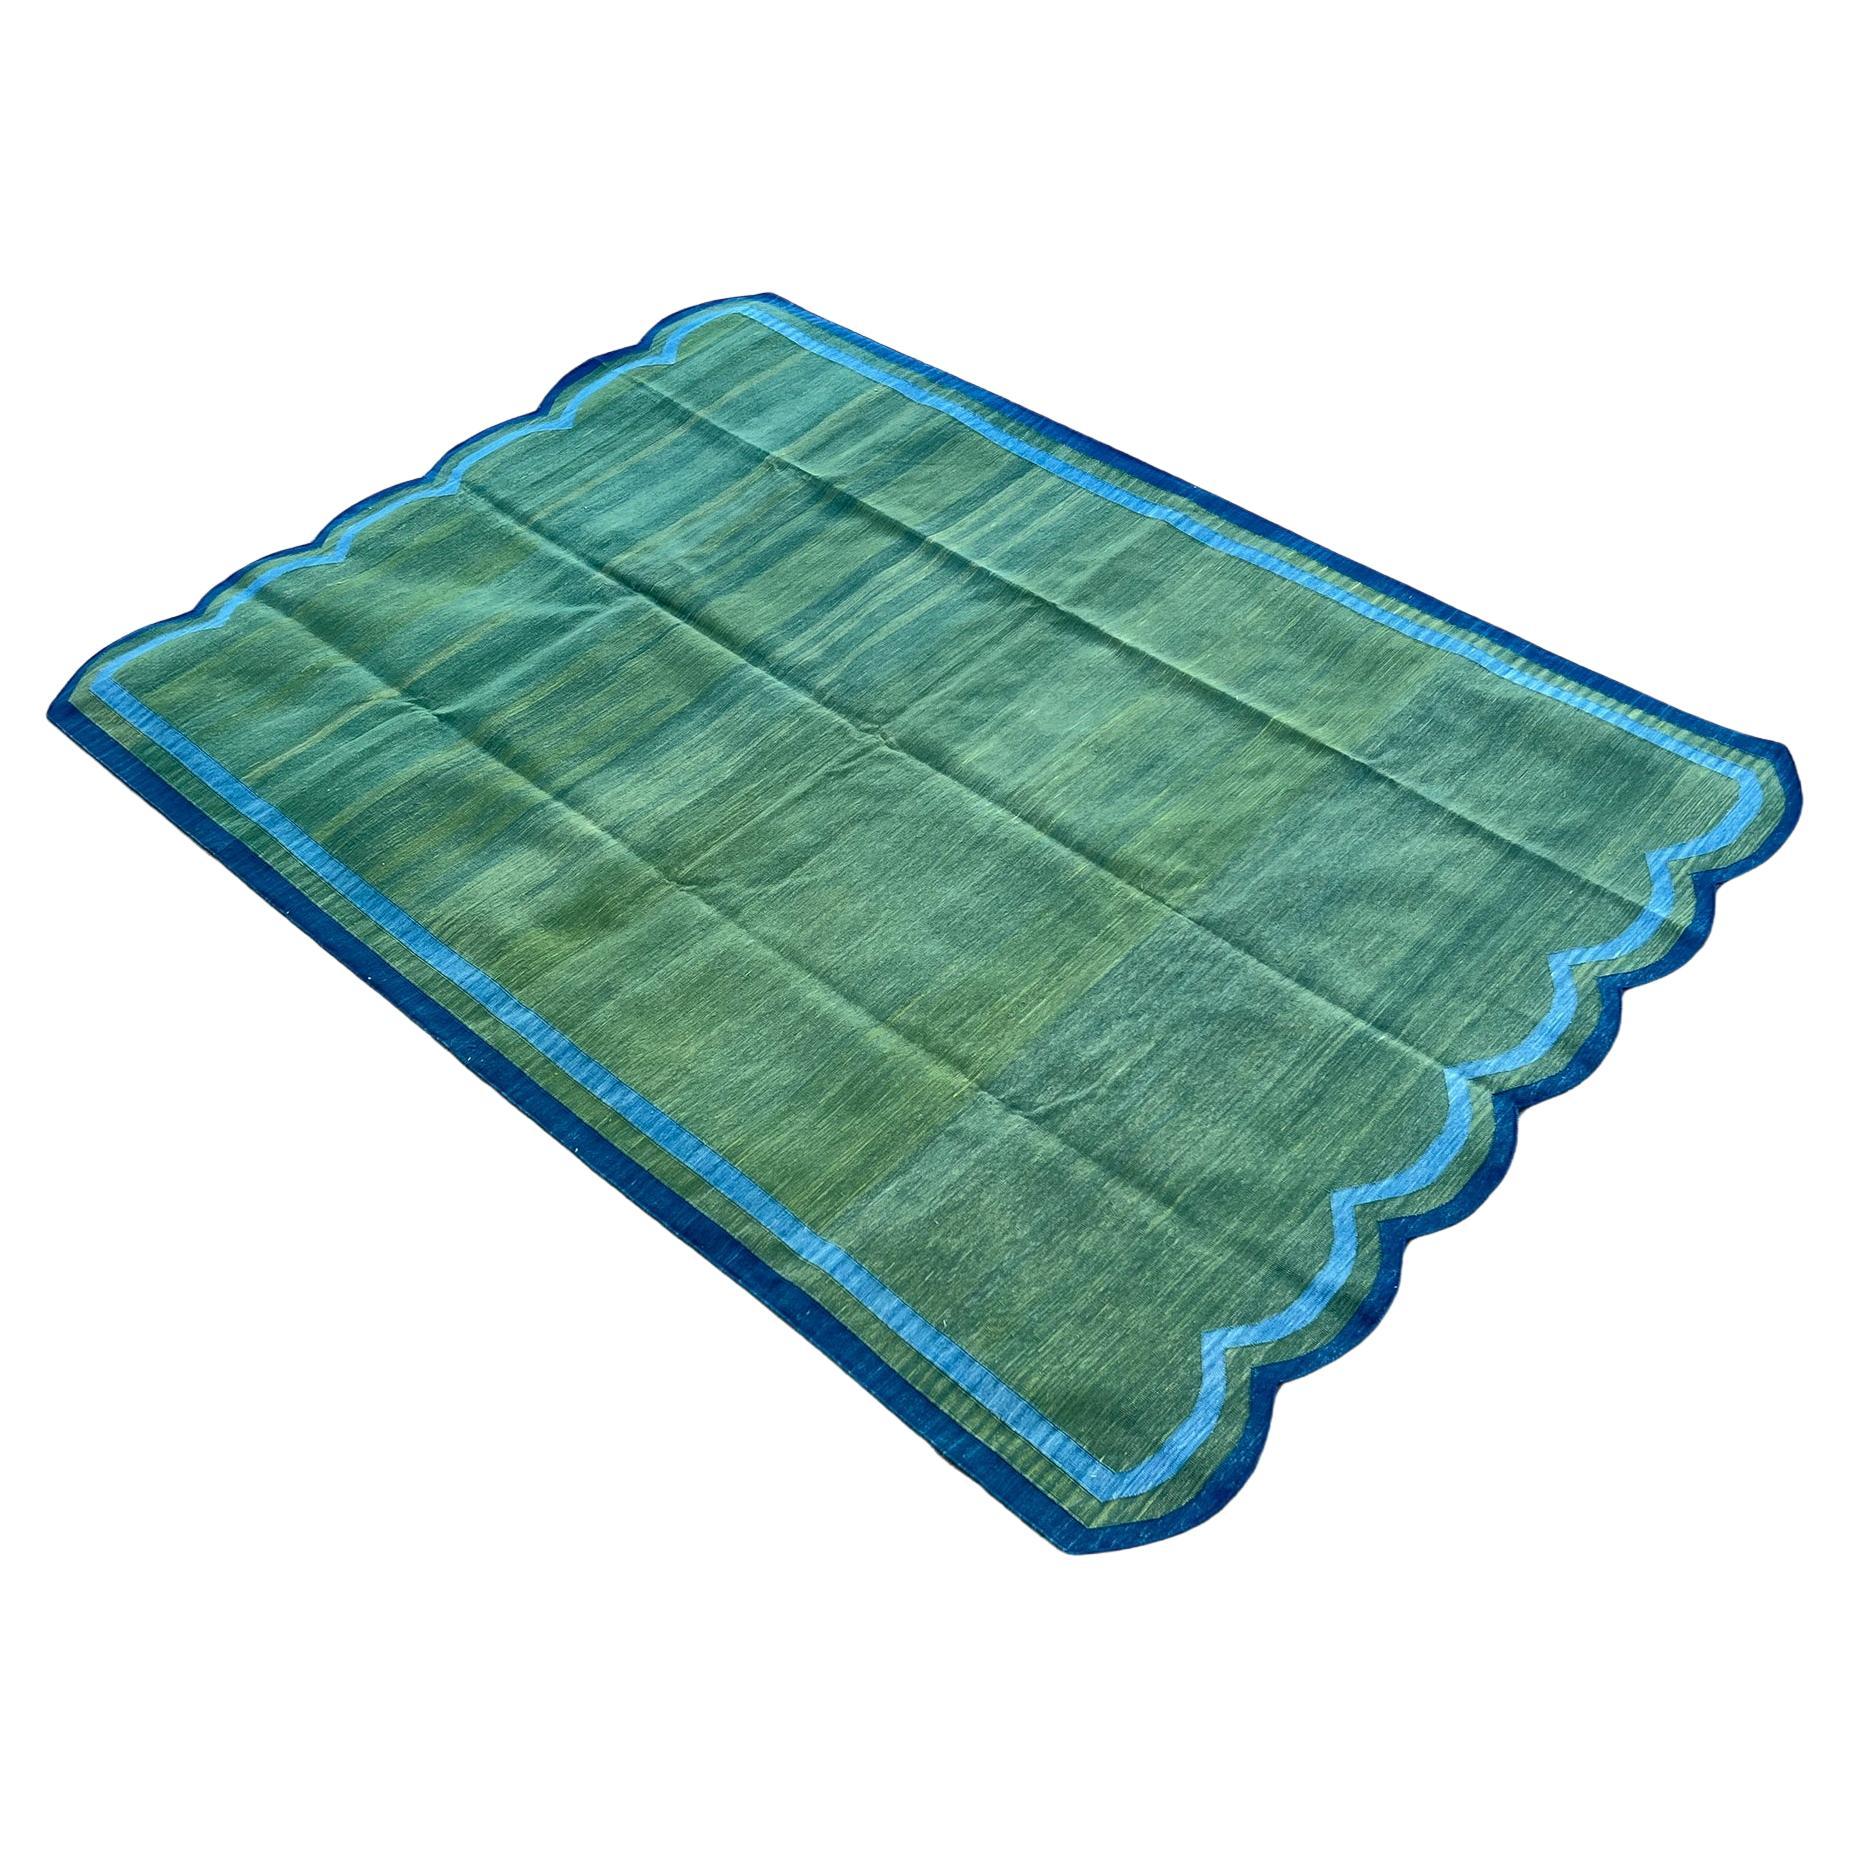 Handmade Cotton Area Flat Weave Rug, 6x9 Green And Blue Scallop Striped Dhurrie For Sale